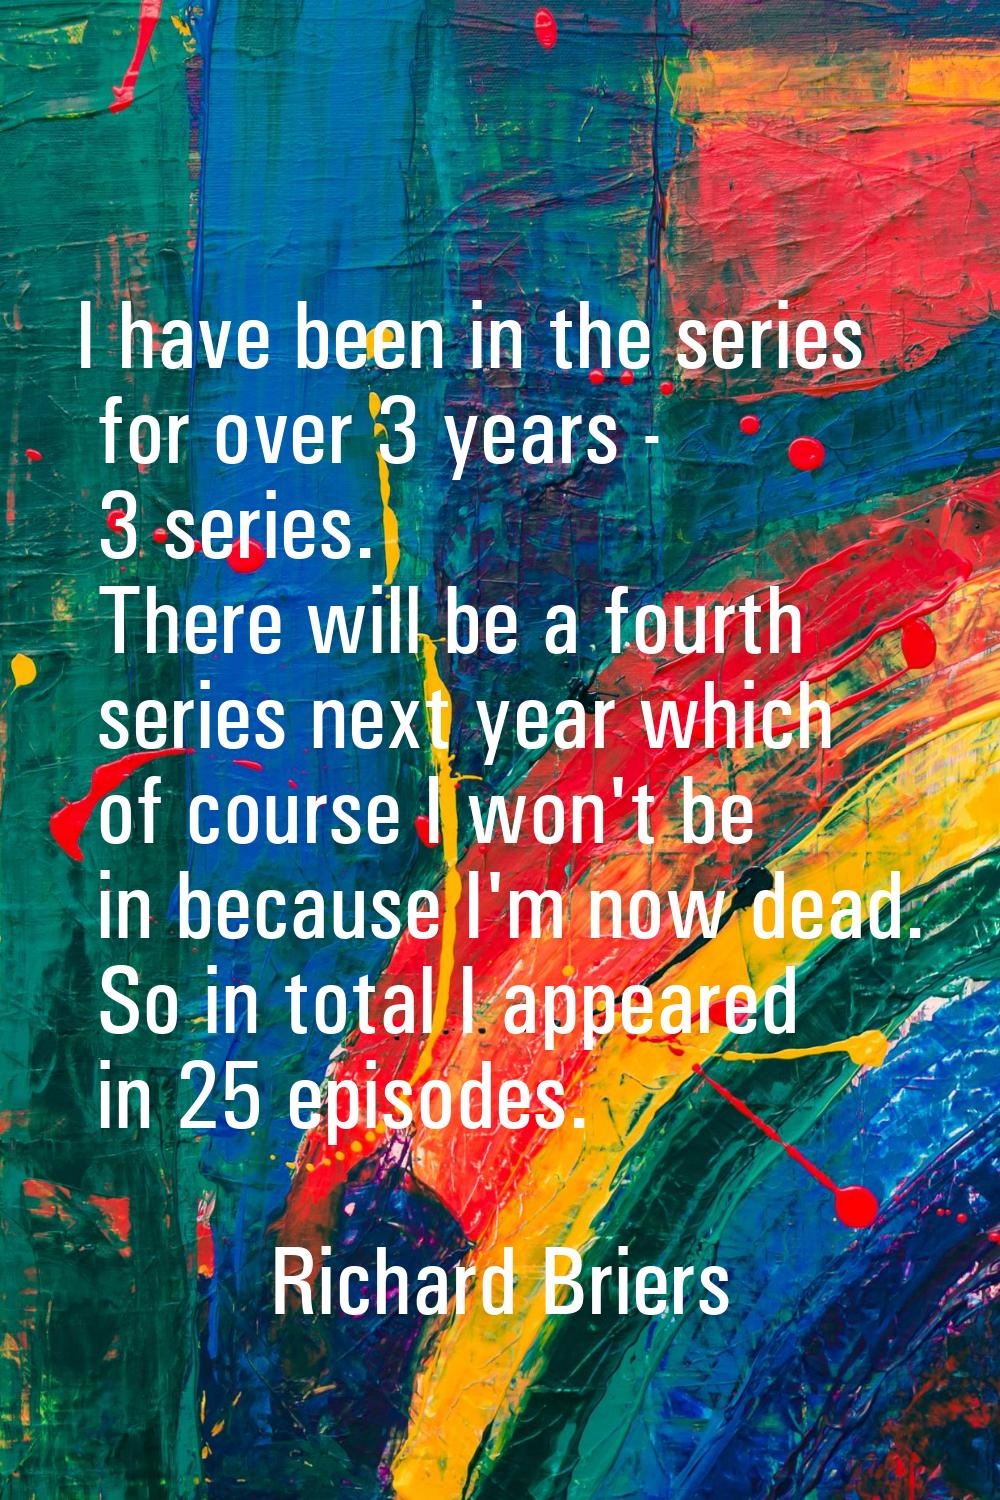 I have been in the series for over 3 years - 3 series. There will be a fourth series next year whic